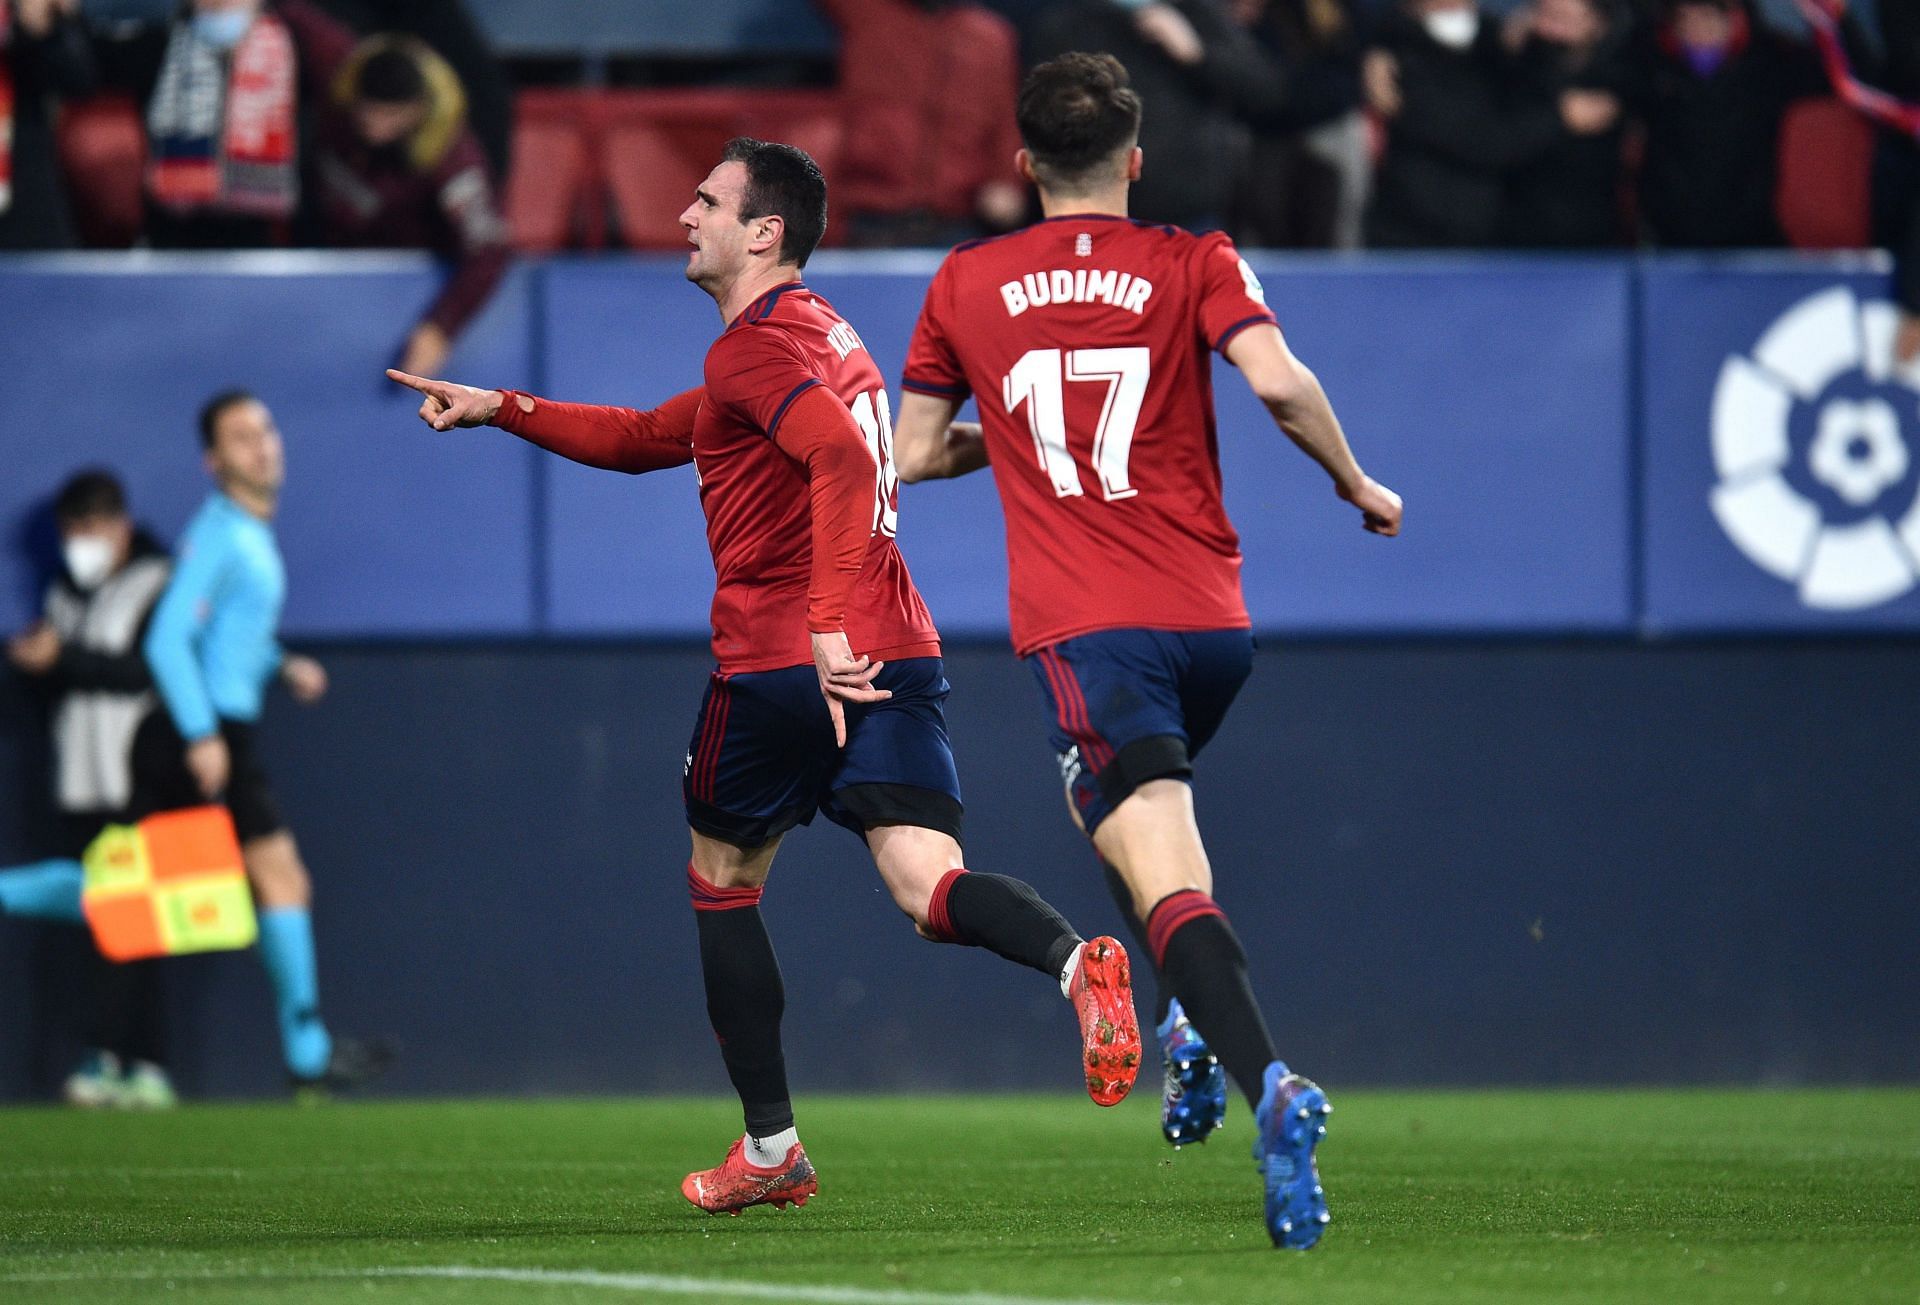 Osasuna are looking to climb up the table